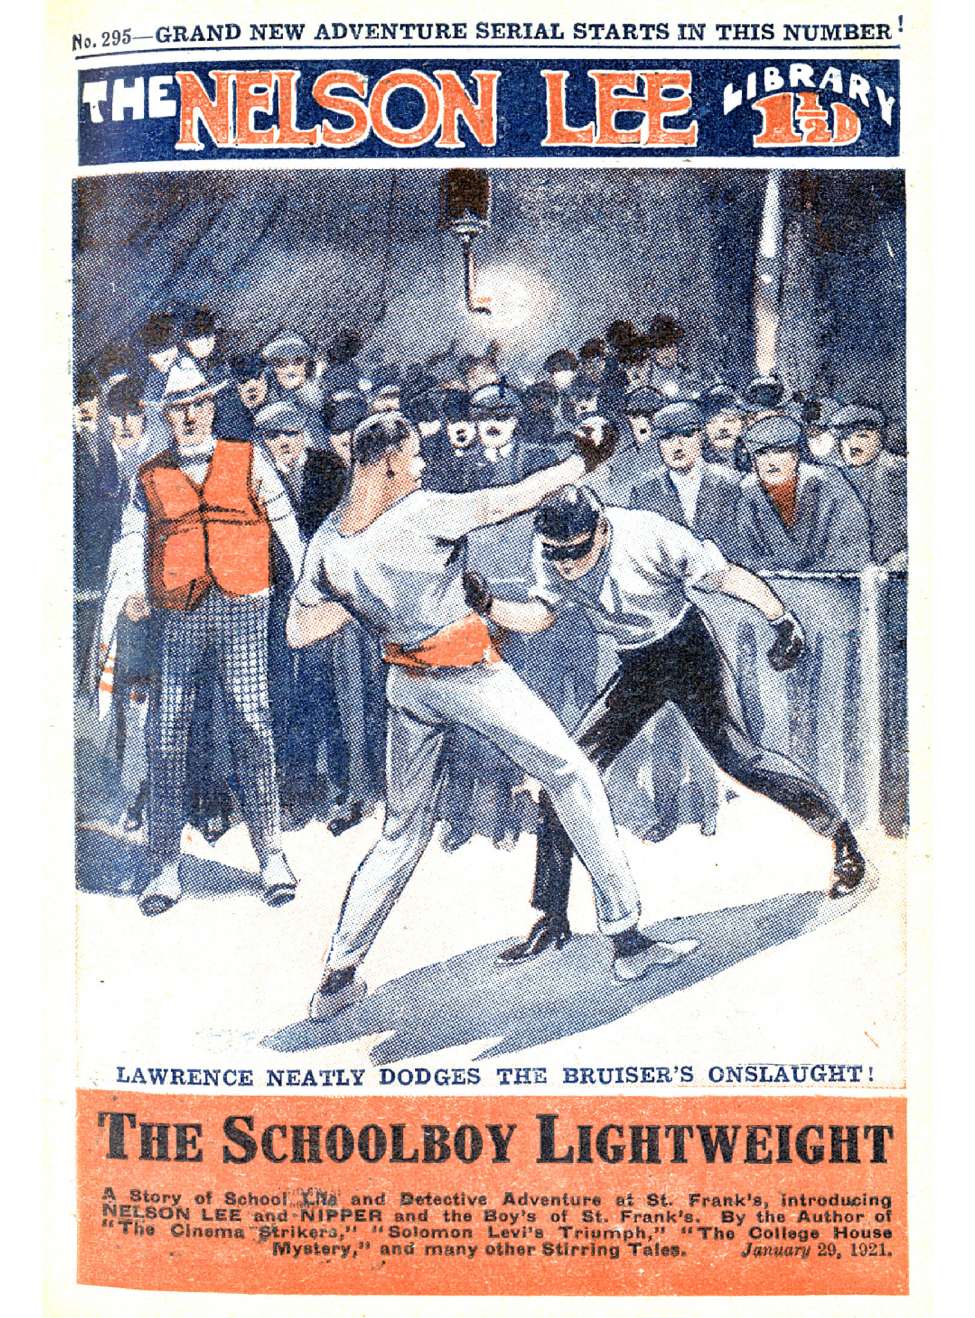 Comic Book Cover For Nelson Lee Library s1 295 - The Schoolboy Lightweight